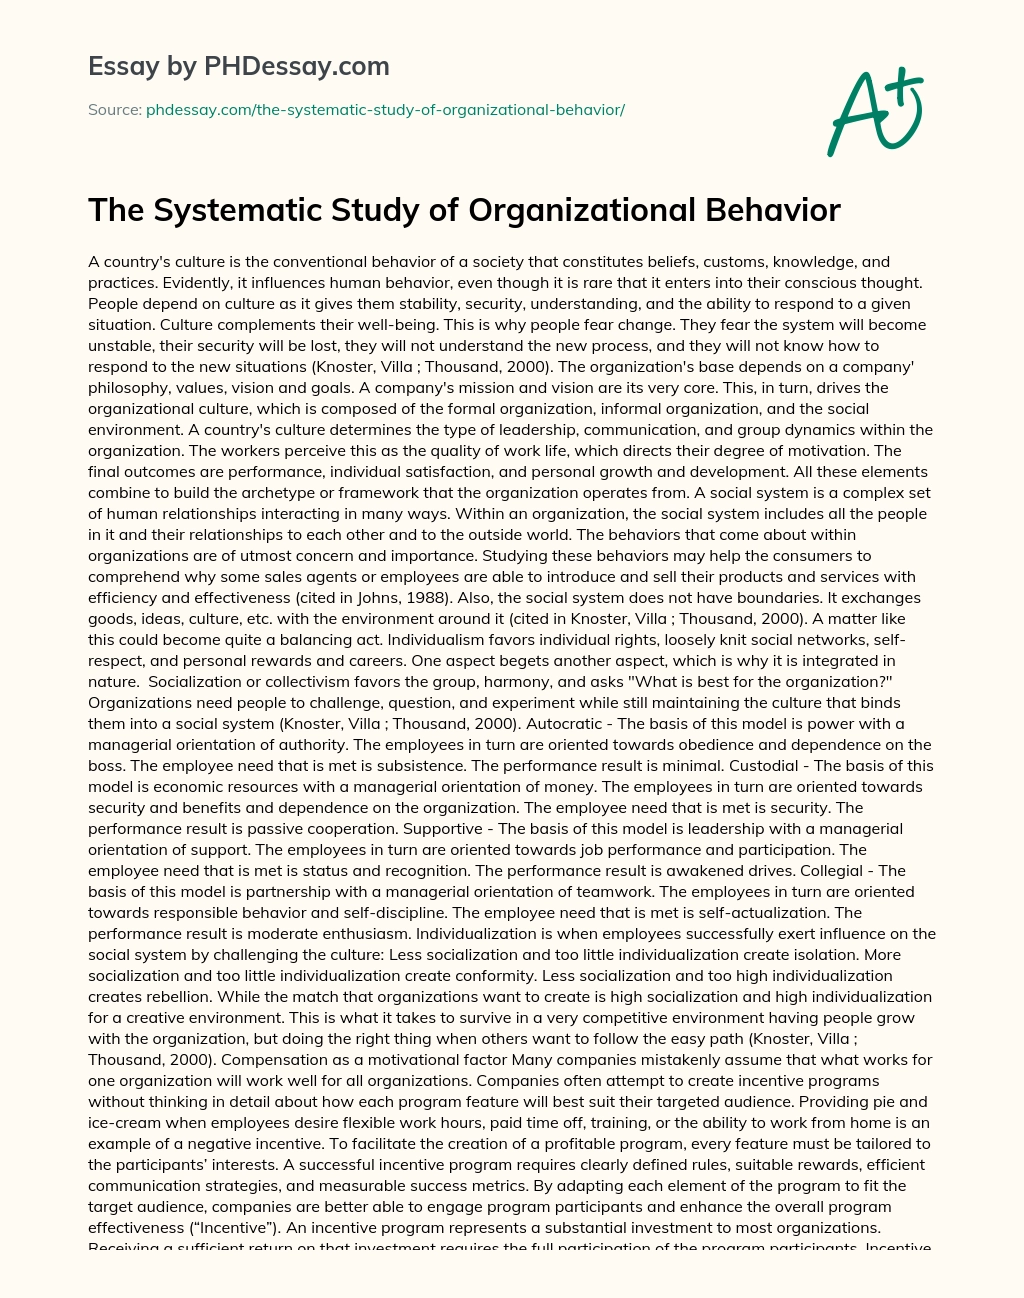 The Systematic Study of Organizational Behavior essay